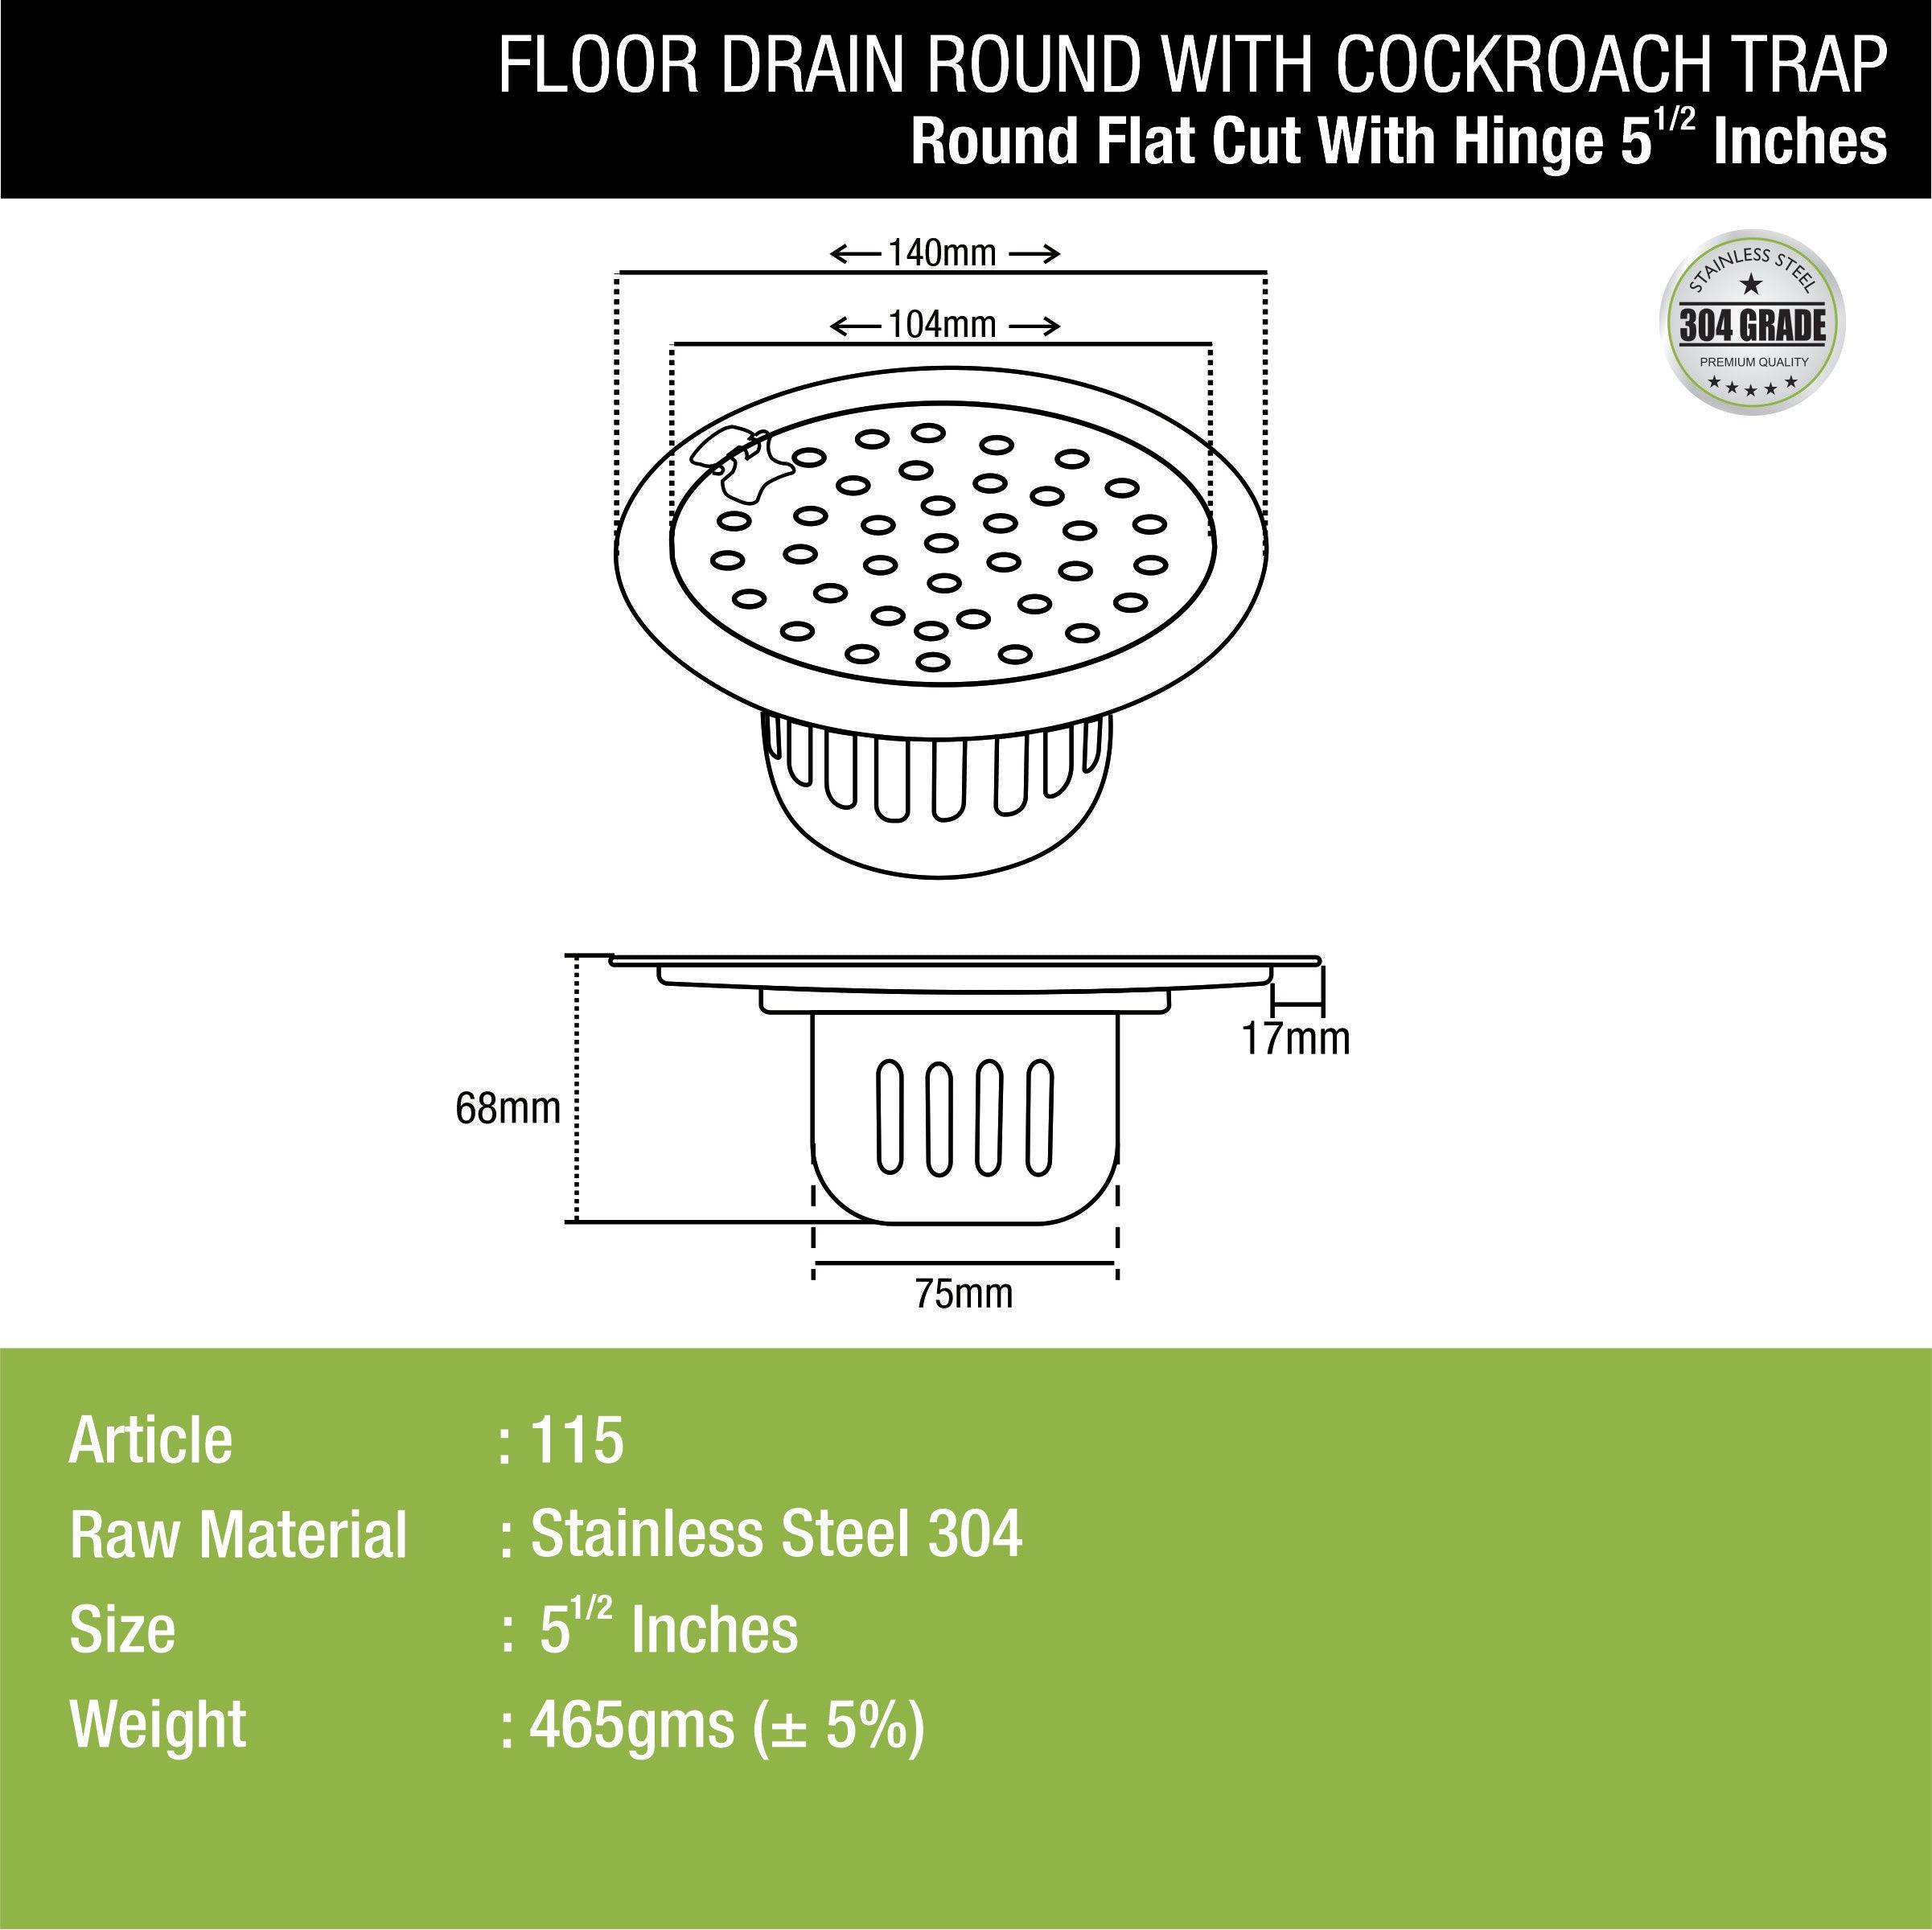 Round Flat Cut Floor Drain (5.5 inches) with Hinge & Cockroach Trap dimensions and sizes 